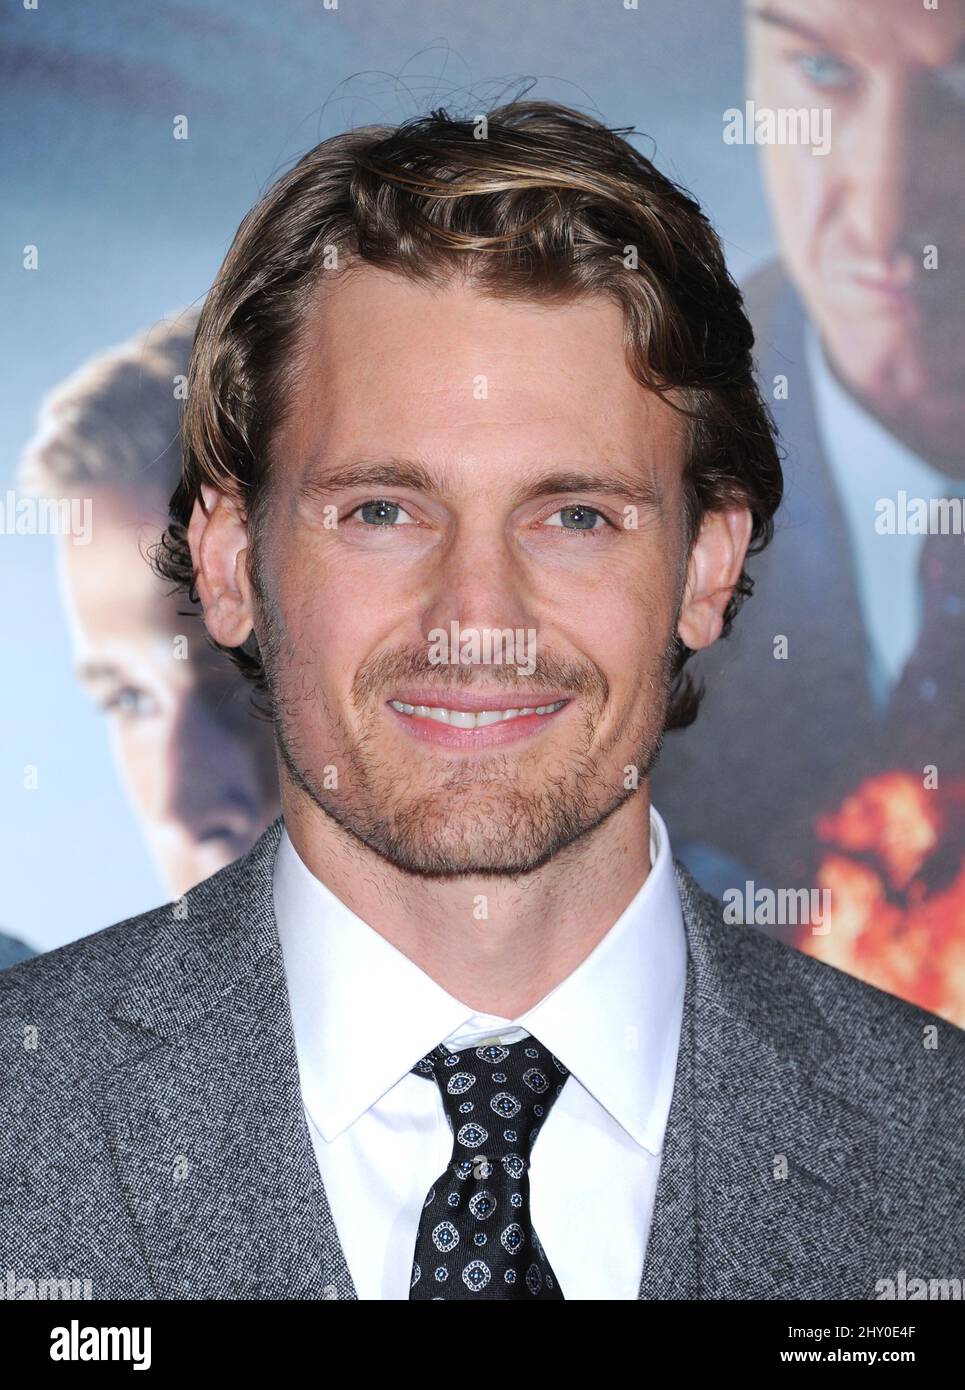 Josh Pence attending the premiere of Gangster Squad in Los Angeles, California. Stock Photo